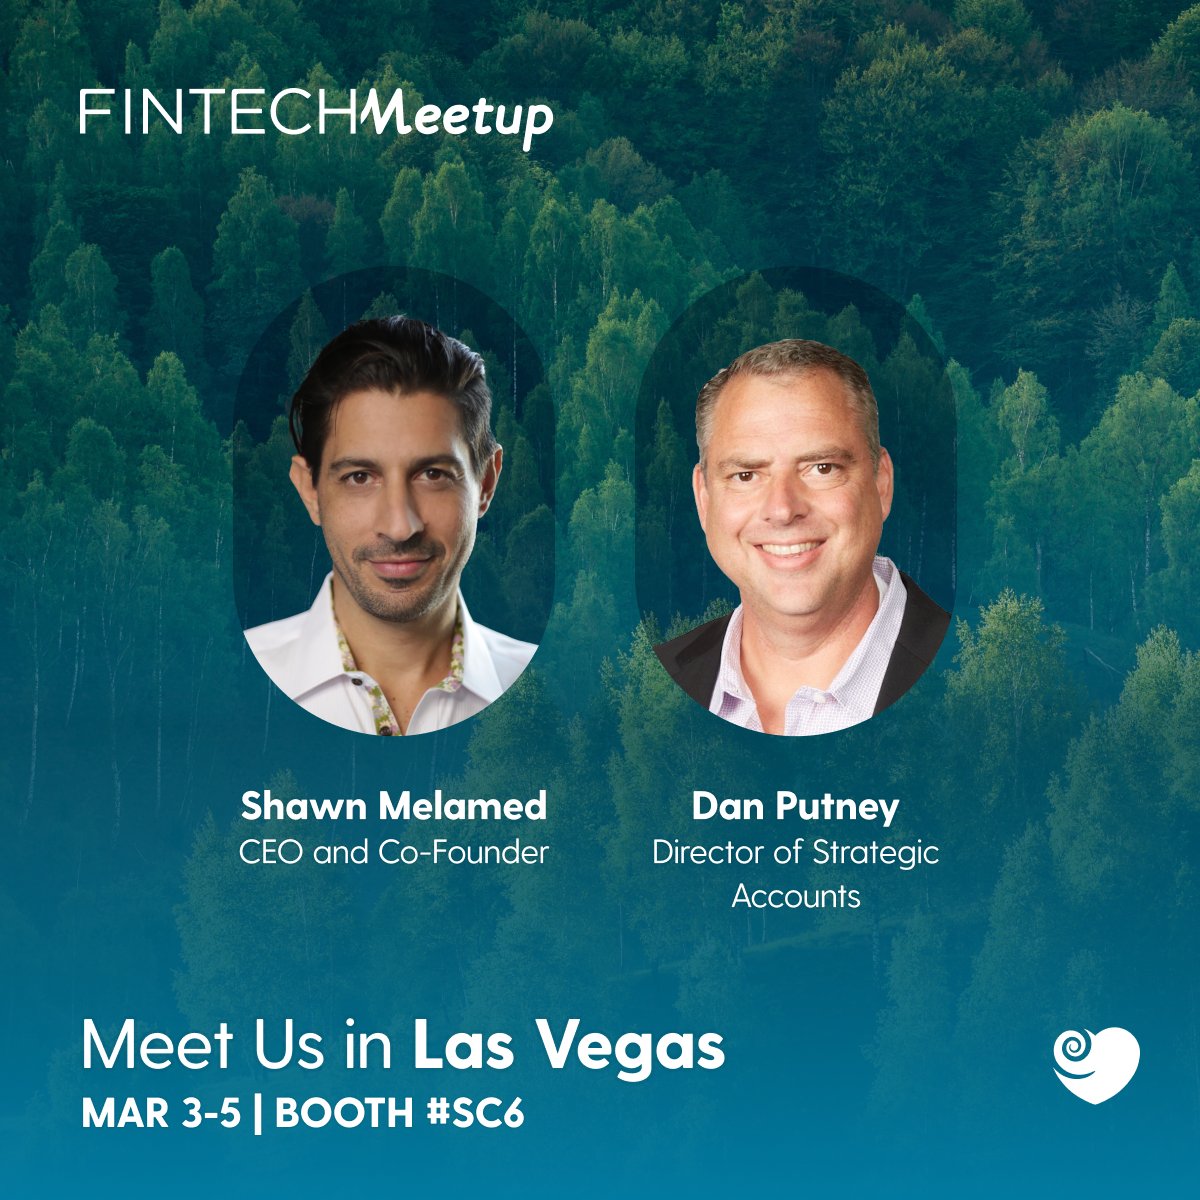 We’re heading to #FintechMeetup in Las Vegas March 3-5!💖 Connect with Shawn and Dan to discover ways Spiral is partnering with banks and credit unions to boost deposits, attract new accounts, and create a better world. 🌎 Grab some time with us 👉️ bit.ly/fintechmeetup24